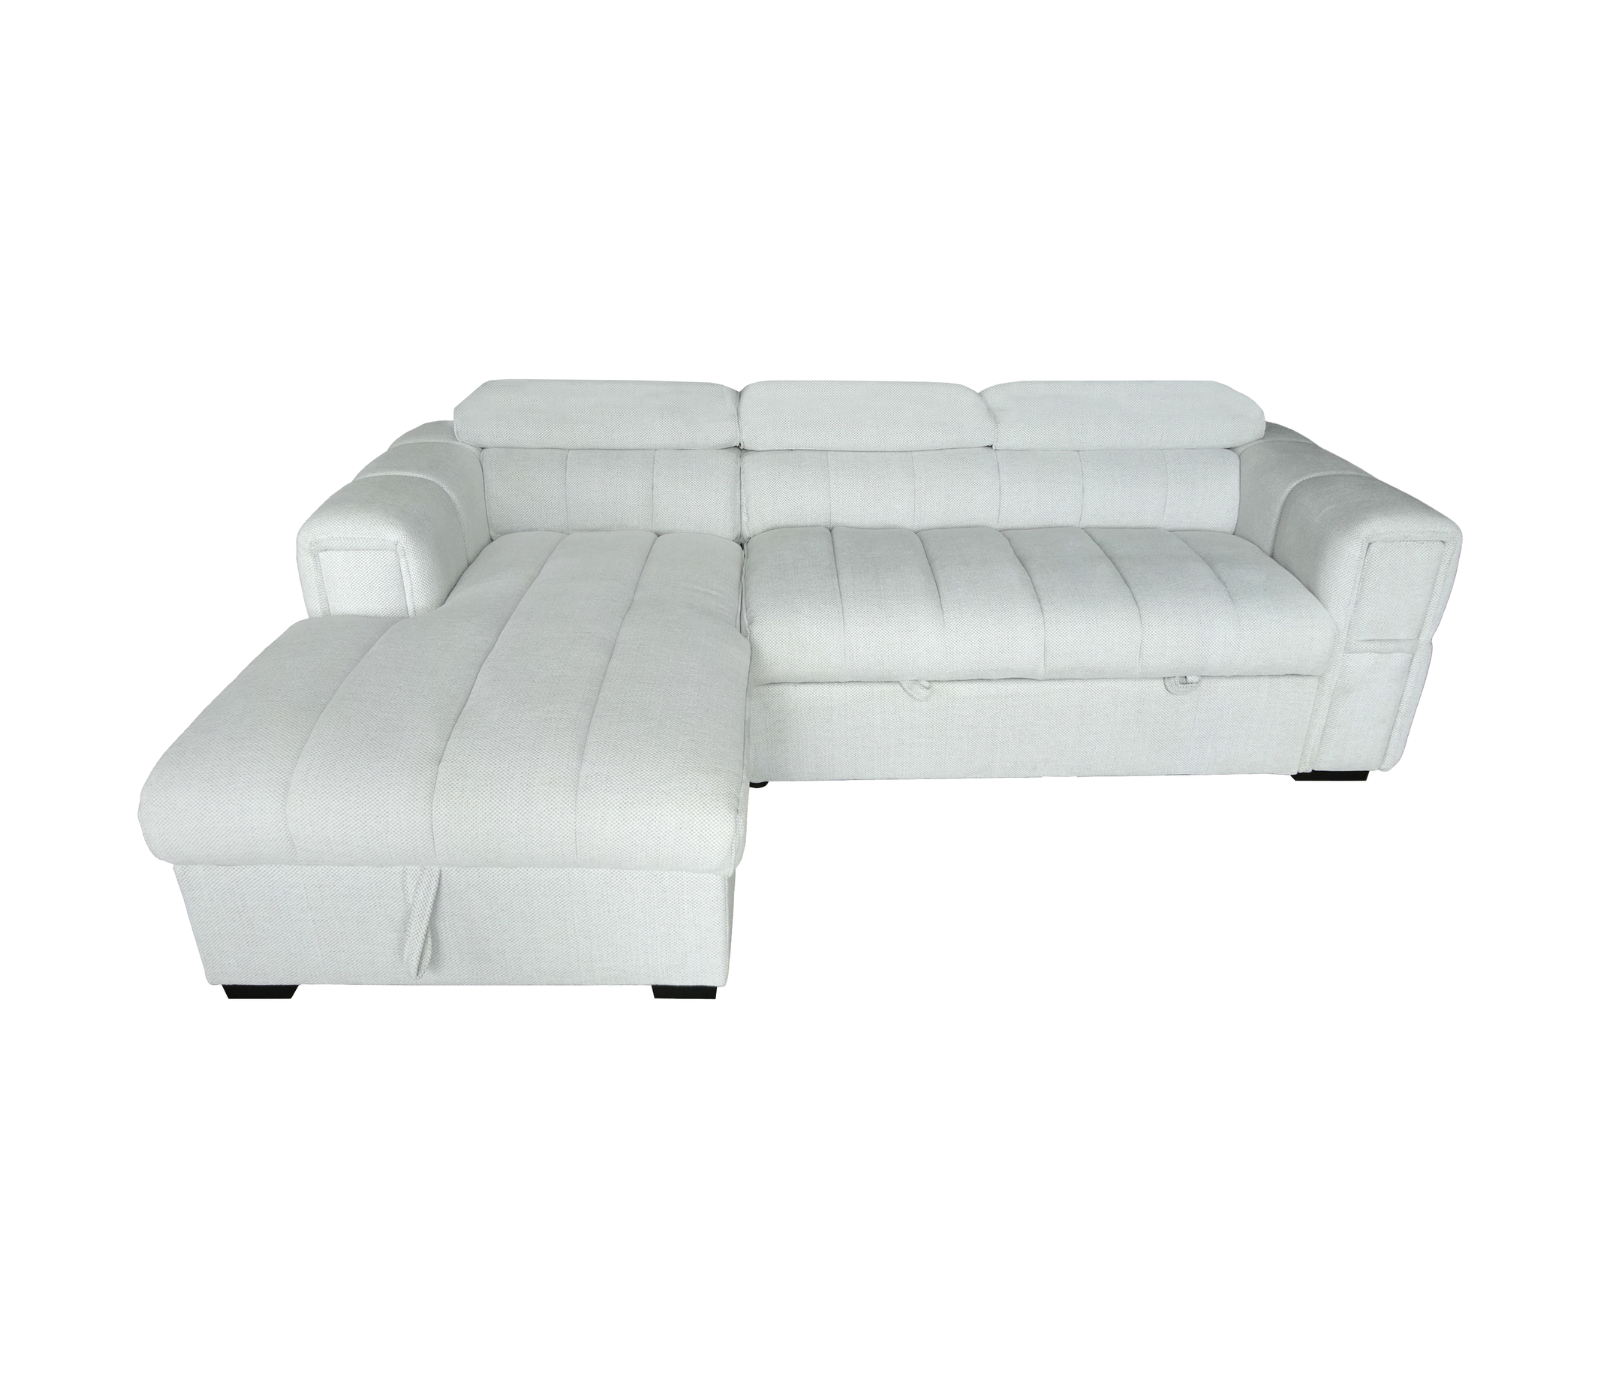 Michelin 2 Piece Sectional w/ Pull-Out Sleeper - Mare White Fabric